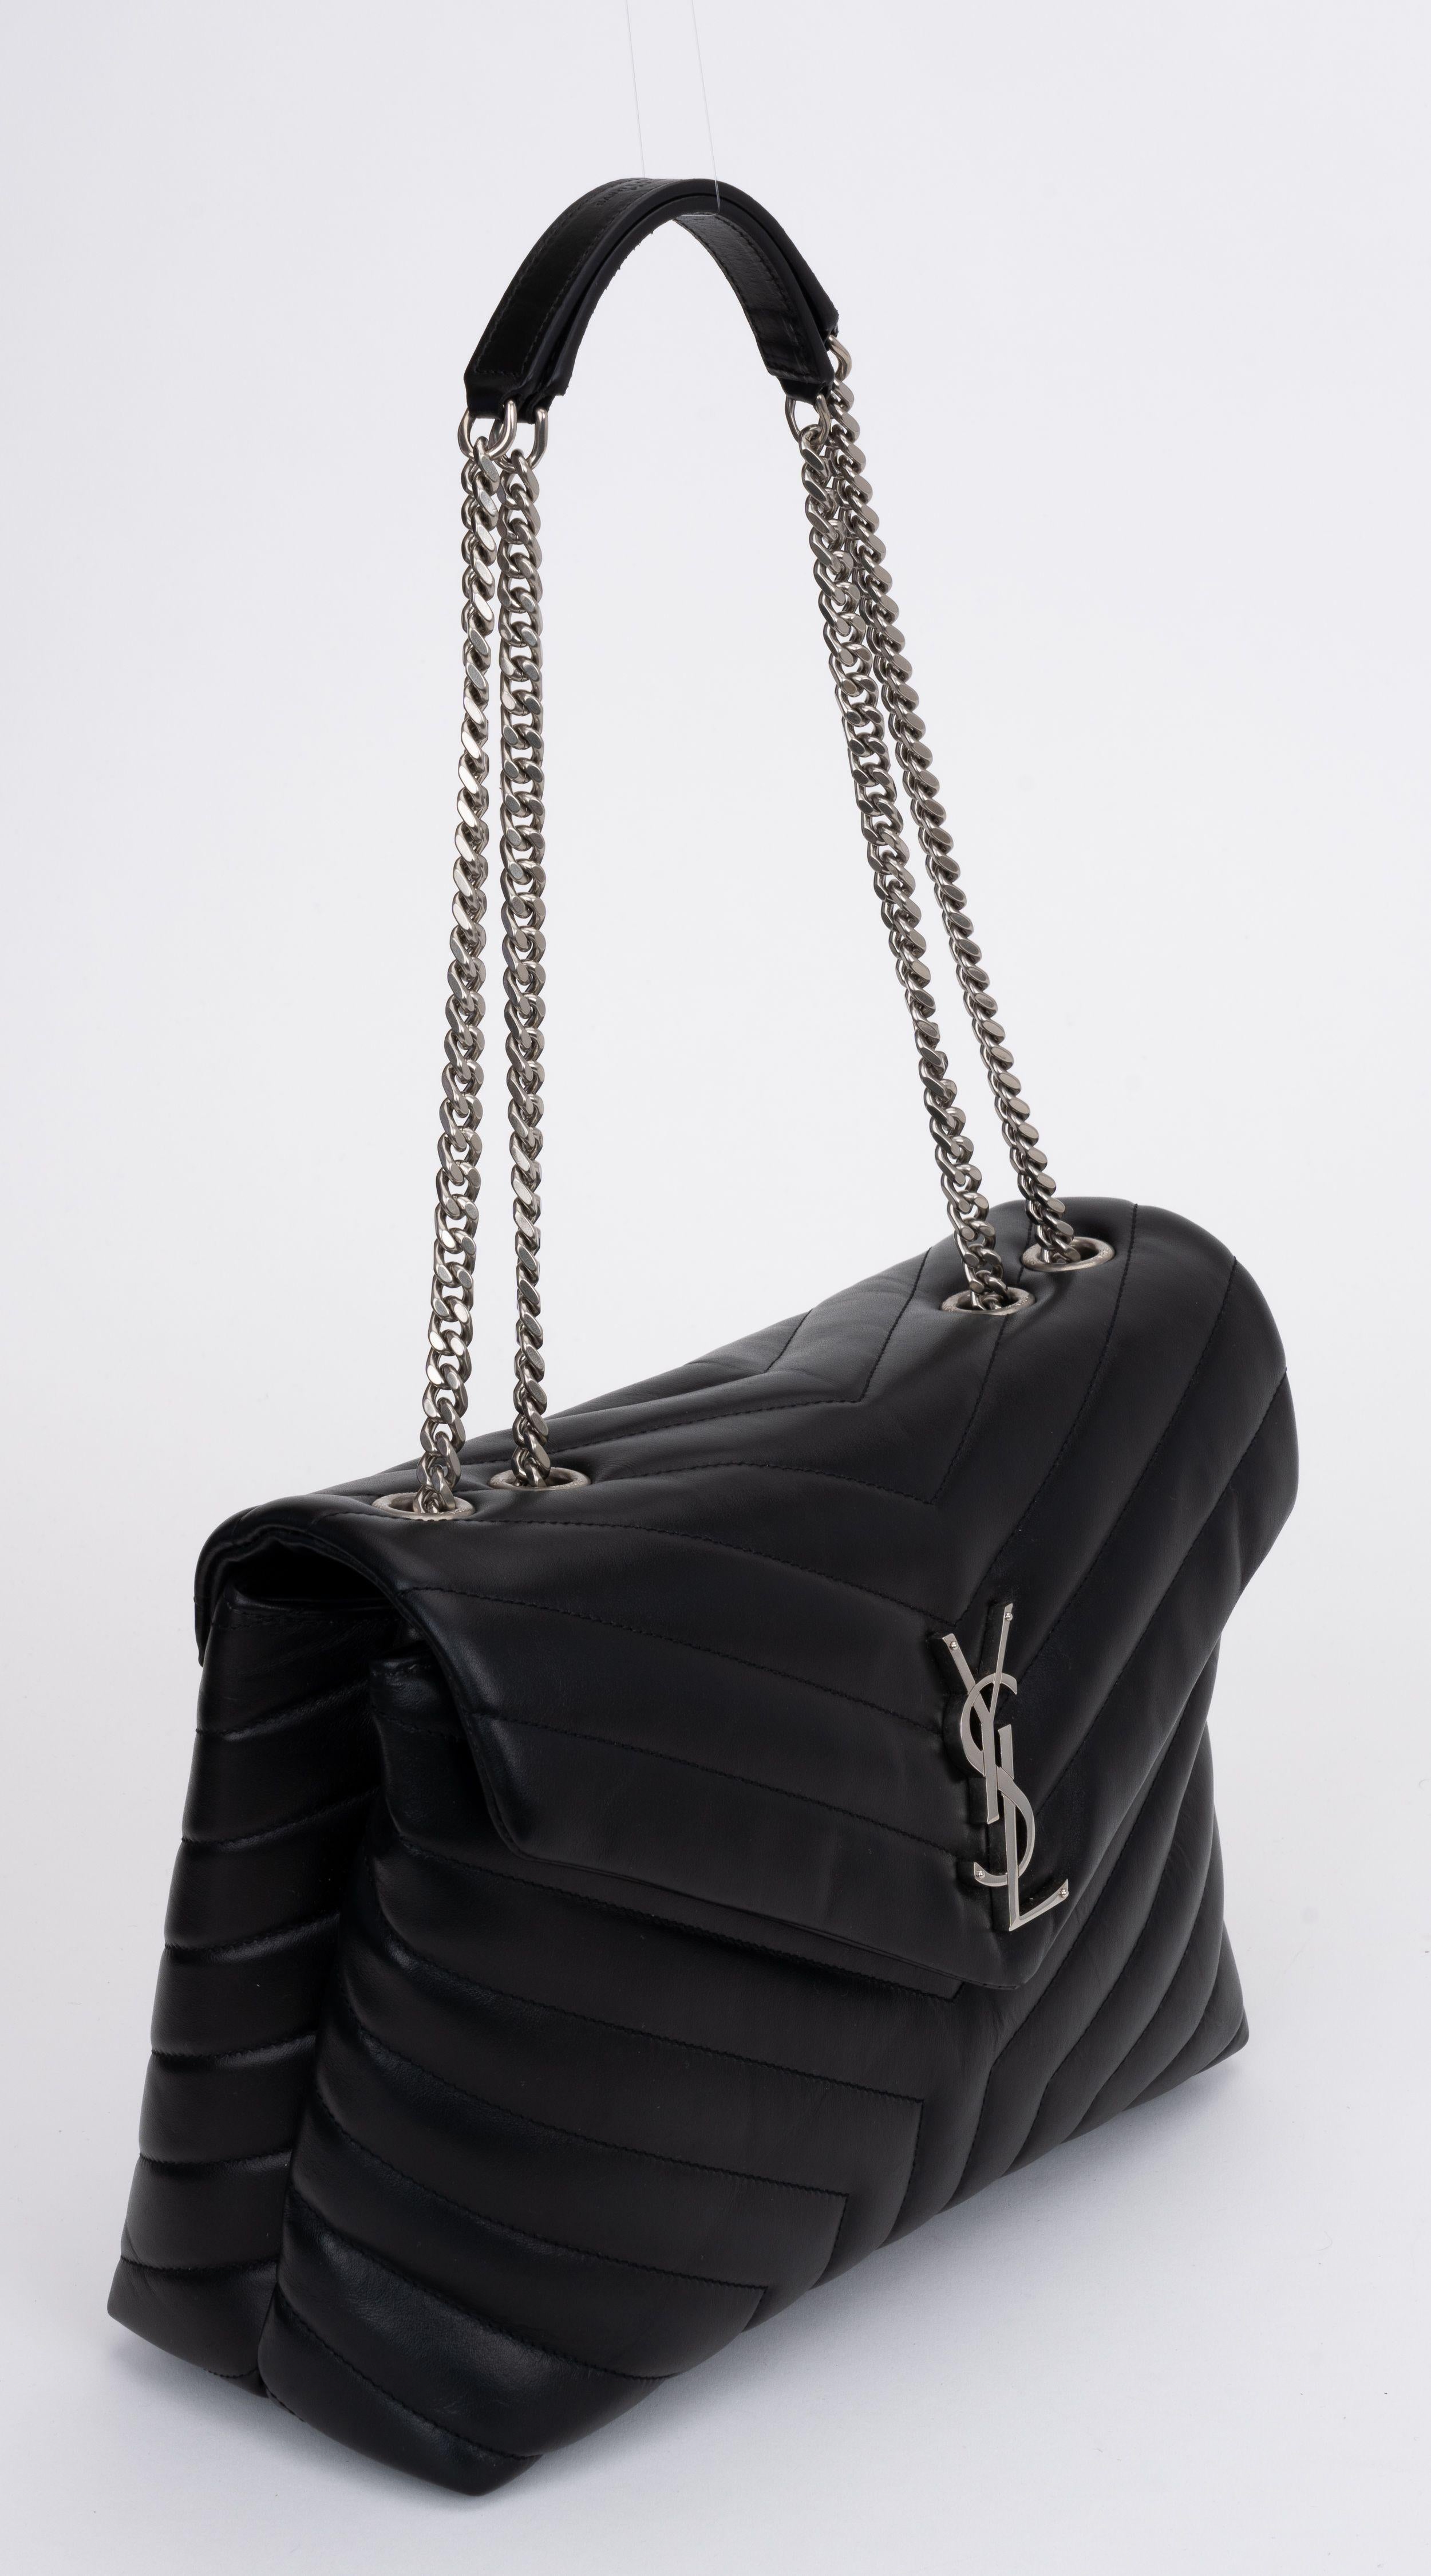 YSL brand new medium loulou shoulder bag in black chevron quilted leather and ruthenium hardware. Two spacious compartments separated by an interior zipped pocket. Can be worn shoulder length or cross body. Shoulder drop 10